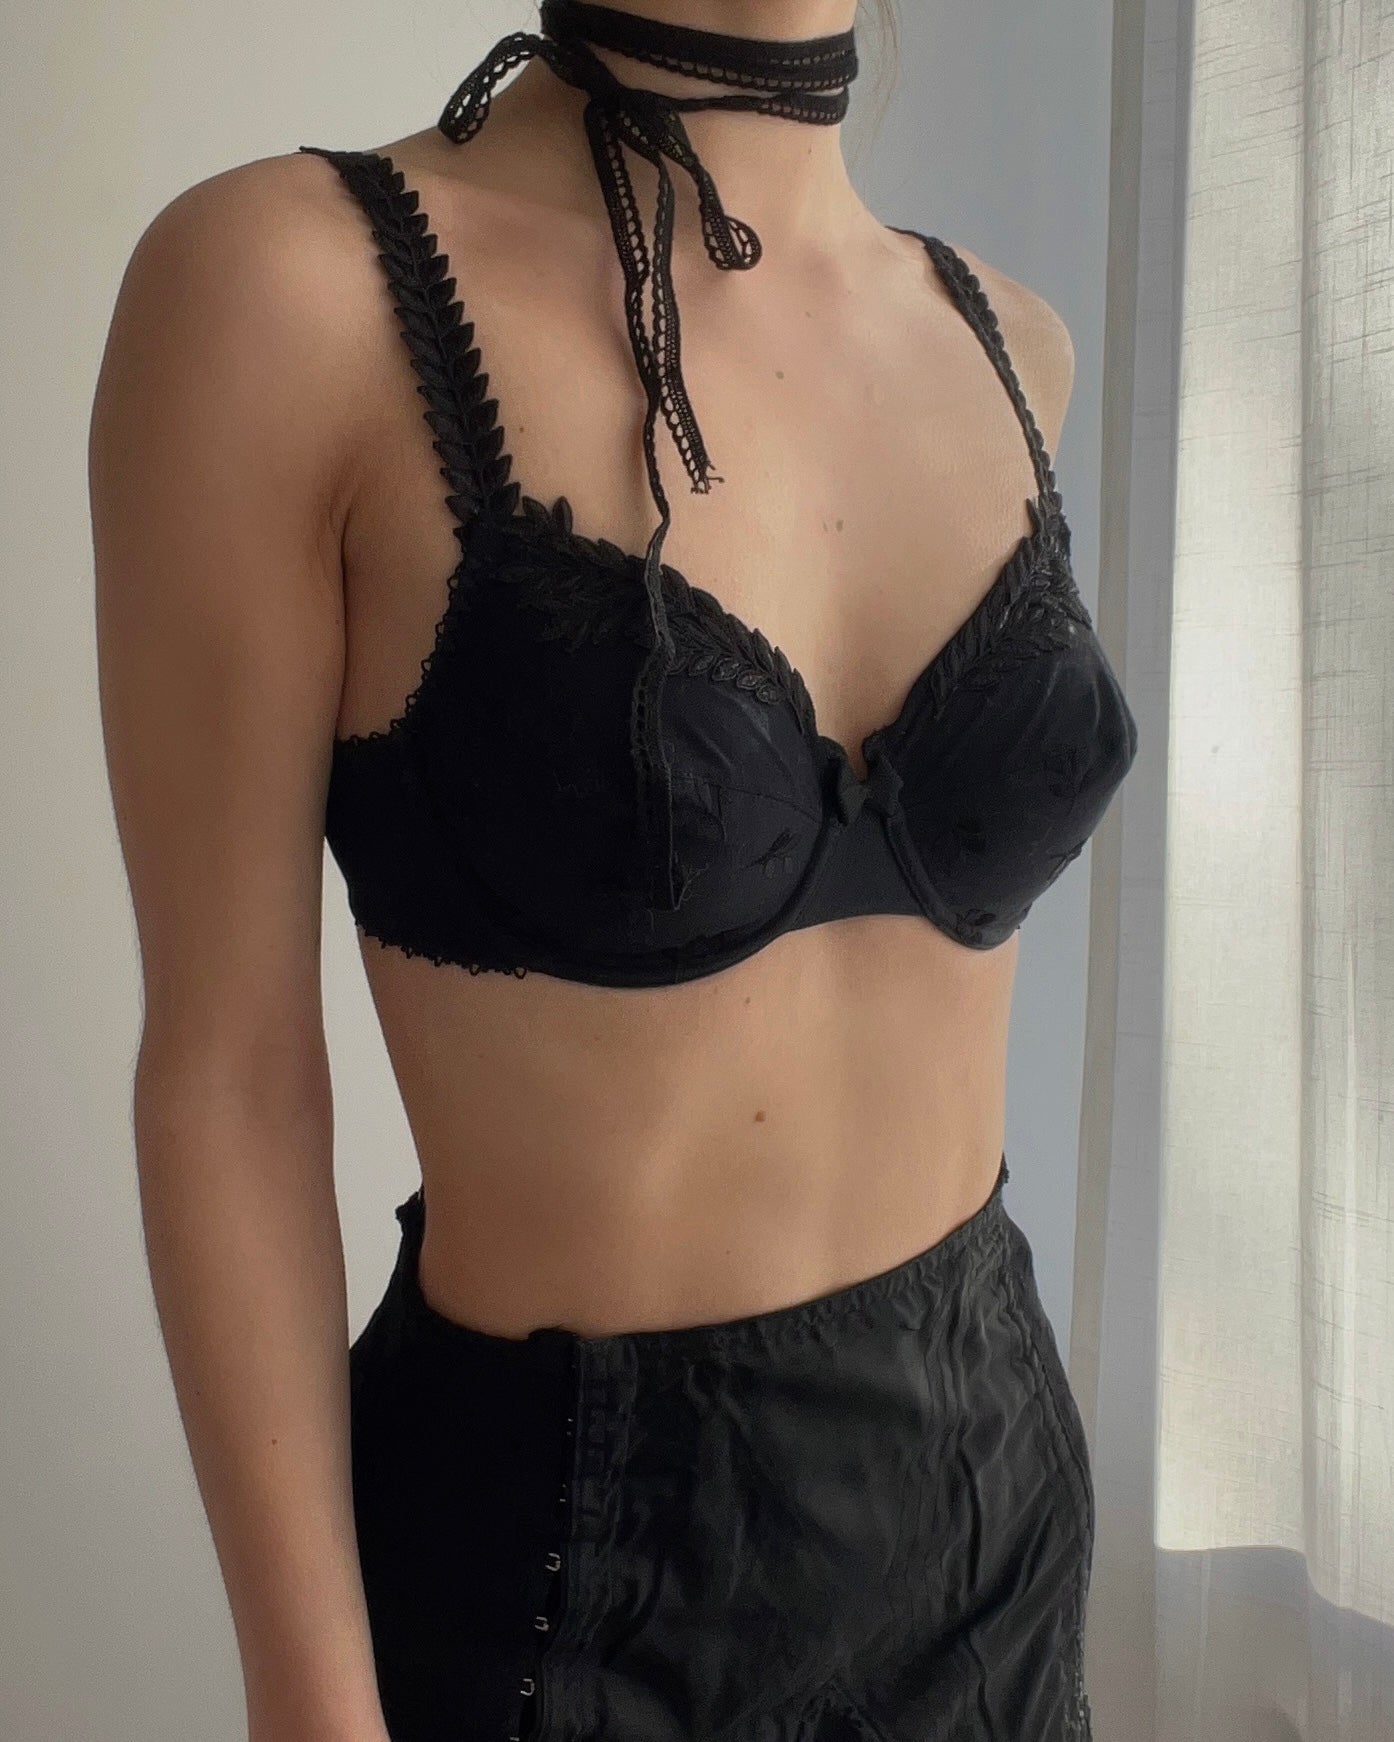 I styled a black lace bra in 3 outfits including putting it on